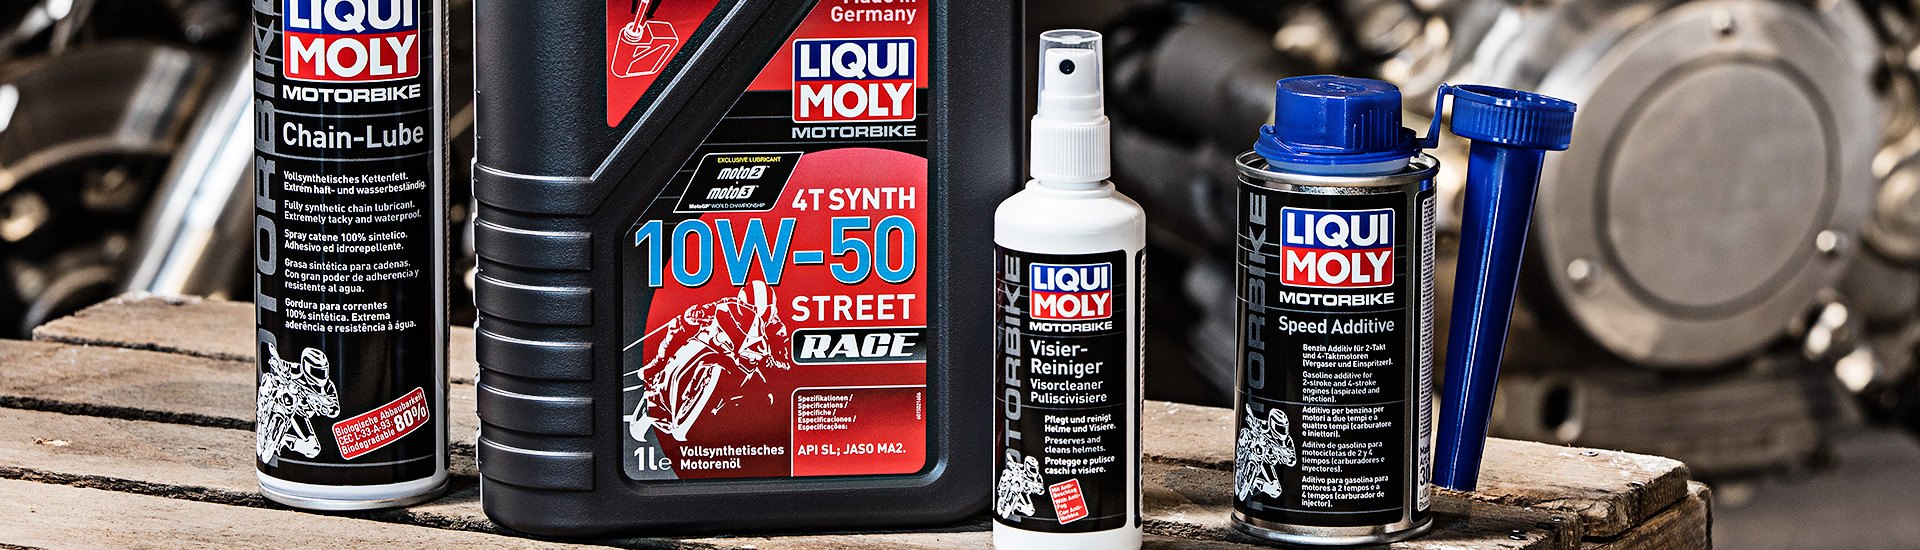 Universal Motorcycle Oils & Chemicals